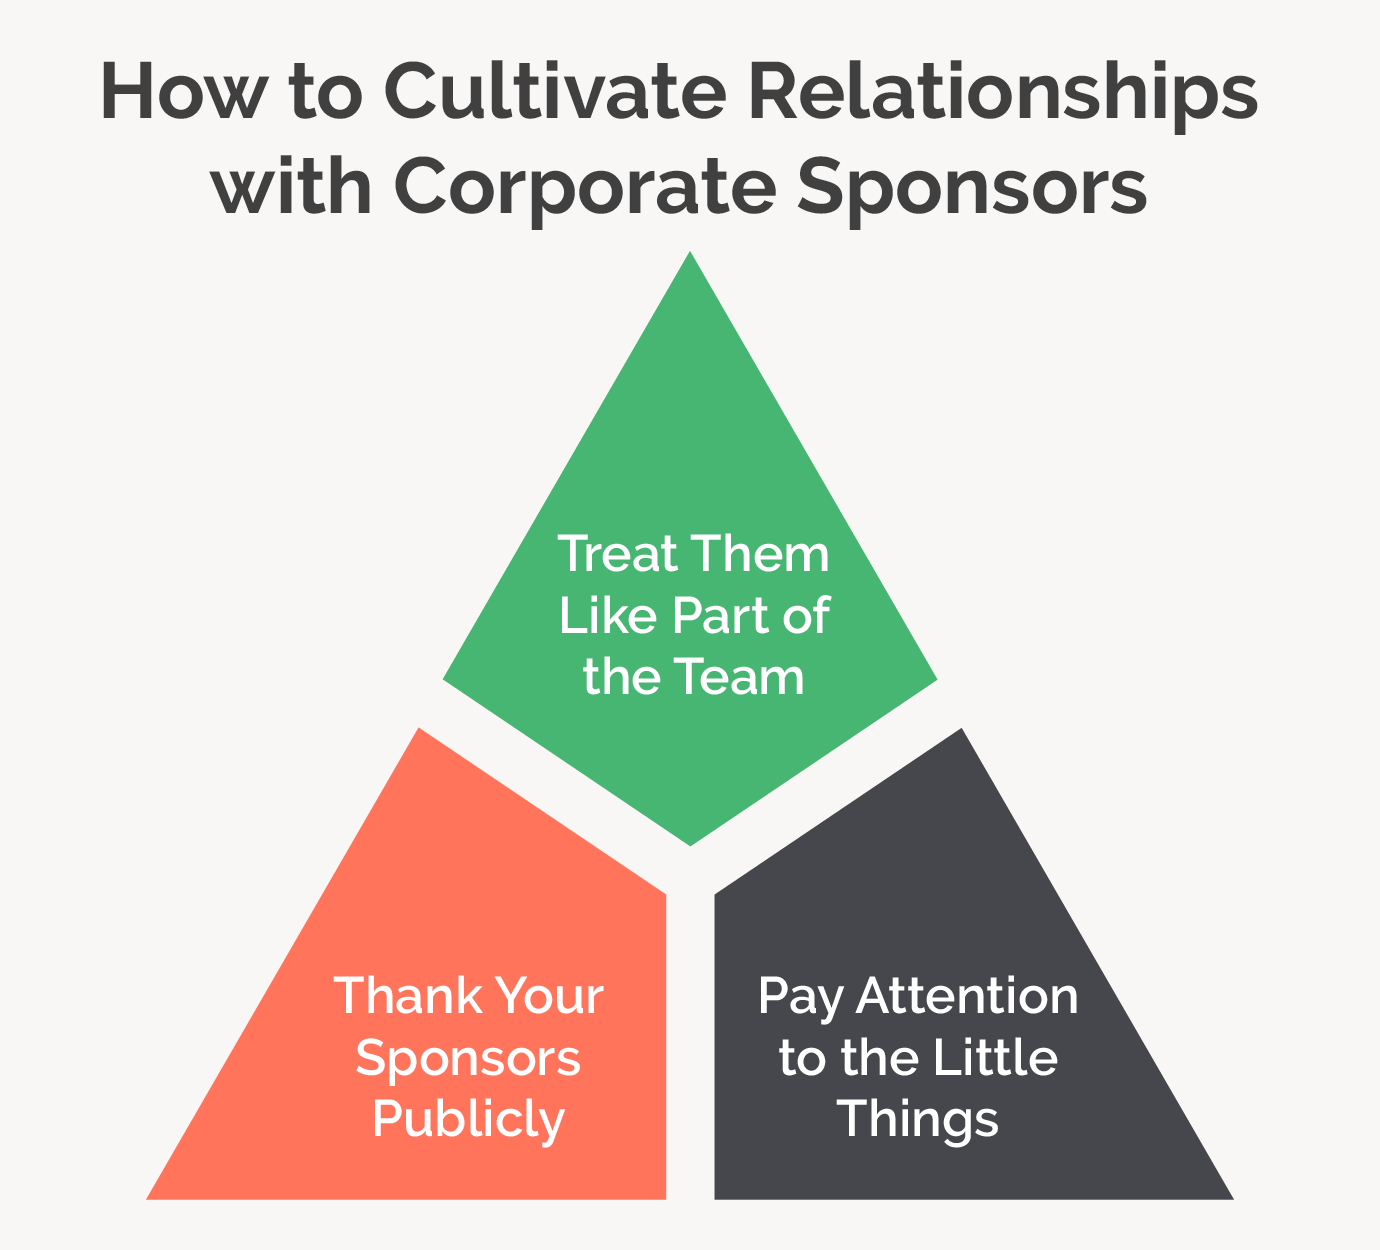 This image shows ways to cultivate relationships with corporate sponsors.